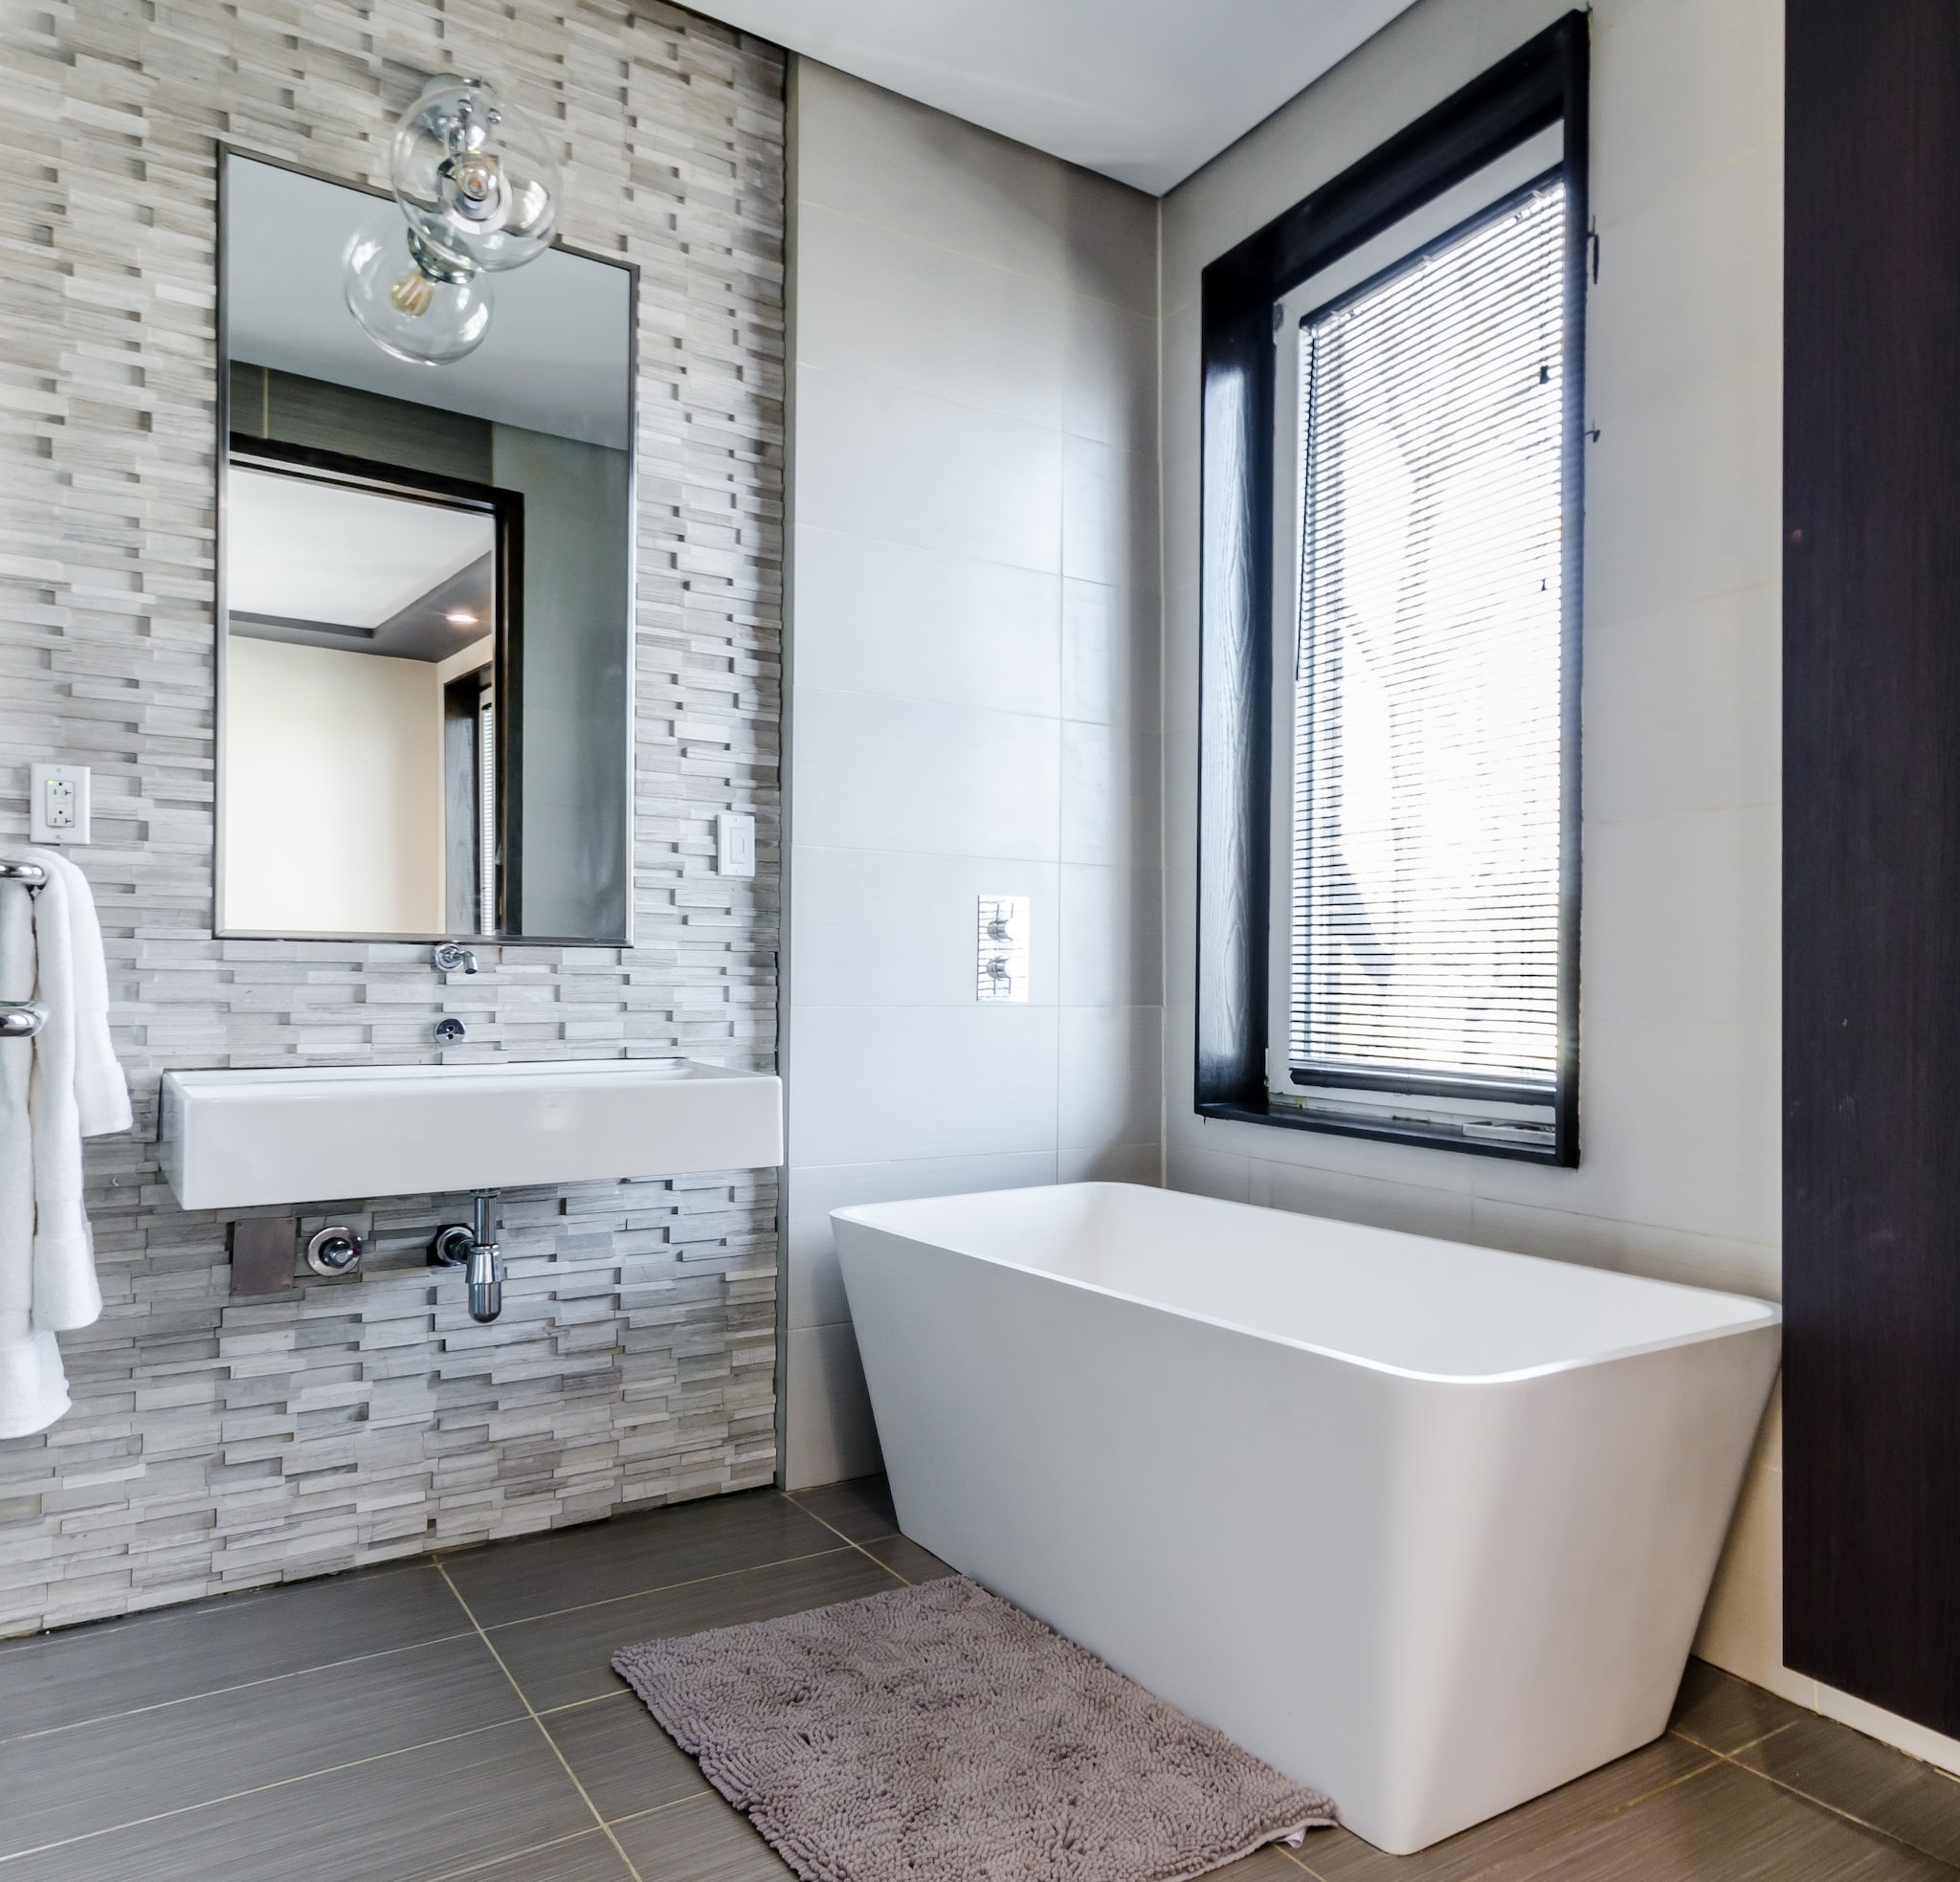 Common Bathroom Design Mistakes You Need to Avoid 